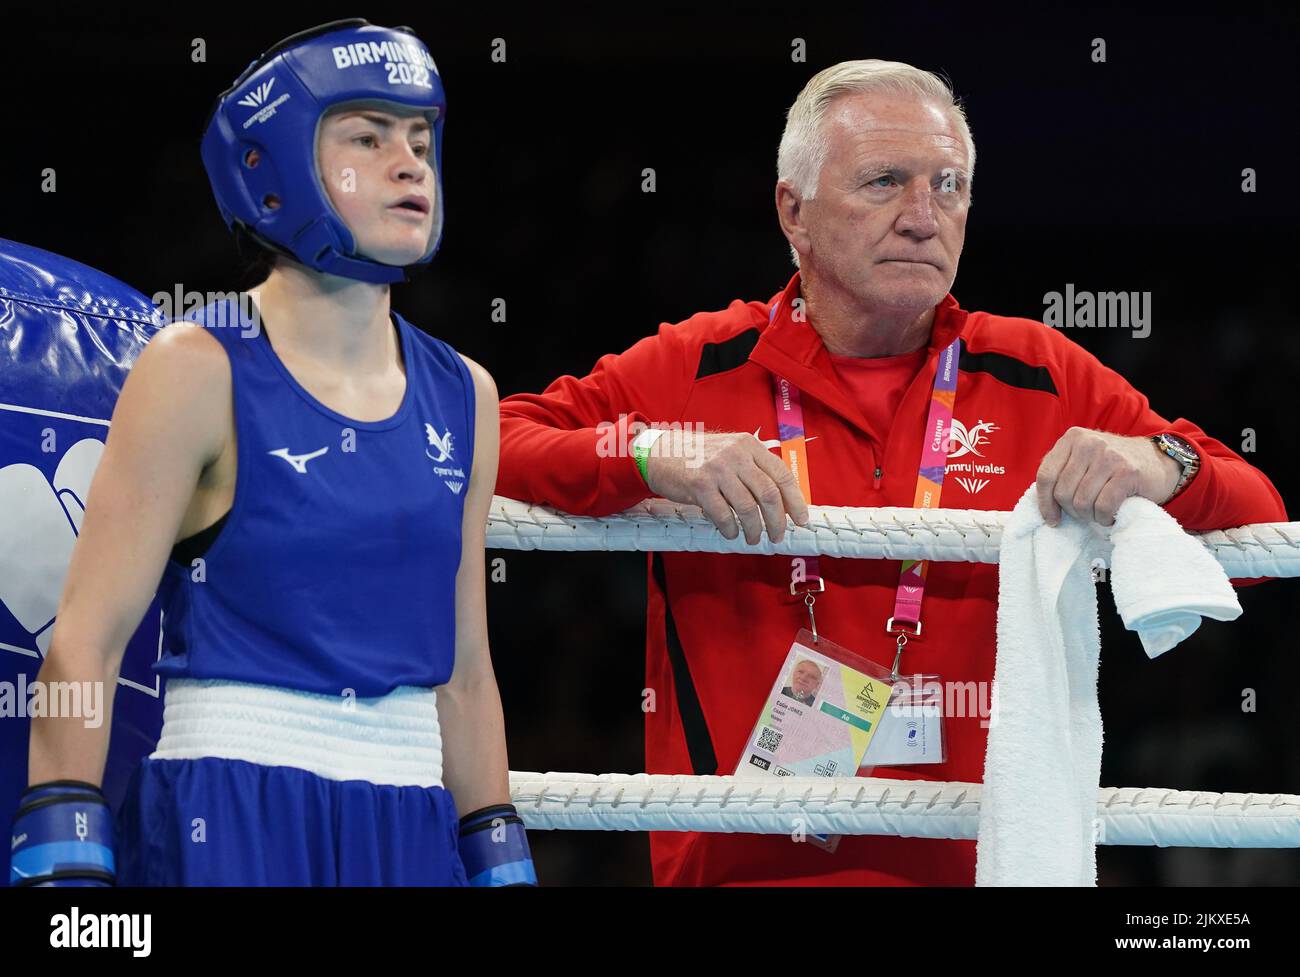 Wales coach Colin Jones looks on during India's Zareen Nikhat and Wales' Helen Jones (blue) during the Women’s Over 48kg-50kg (Light Fly) - Quarter-Final 4 at The NEC on day six of the 2022 Commonwealth Games in Birmingham. Picture date: Wednesday August 3, 2022. Stock Photo